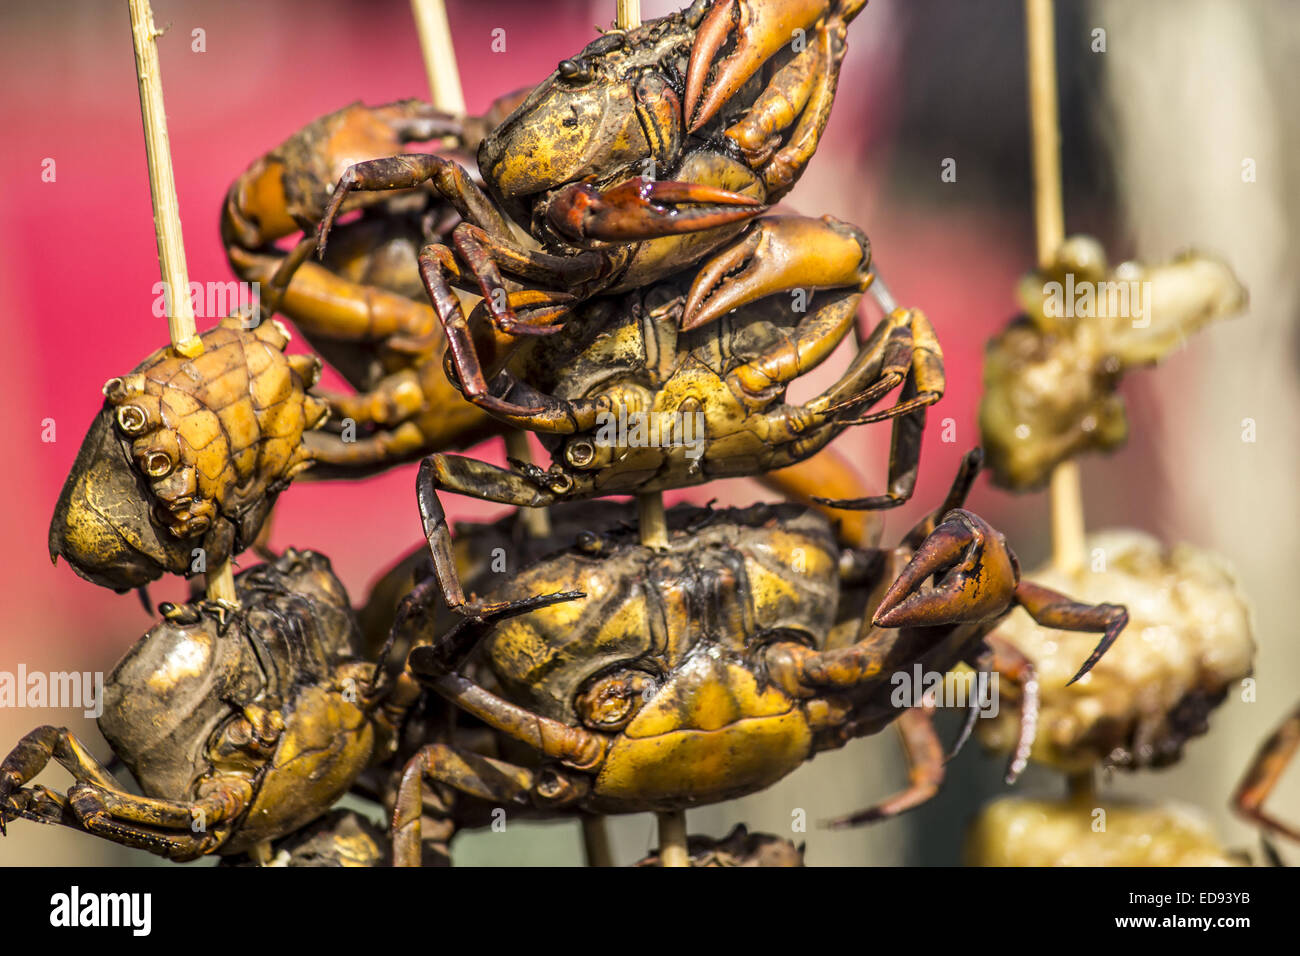 Jan. 2, 2015 - Smoked crabs are on display in a traditional food stall during the inaugural day of the 5th Disang-Brahmaputra festival at Disangmukh in Sivasagar district of northeastern Assam state on January 2, 2015. Somoked meats are delicacy among tribal communities of the Assam state. © Luit Chaliha/ZUMA Wire/ZUMAPRESS.com/Alamy Live News Stock Photo